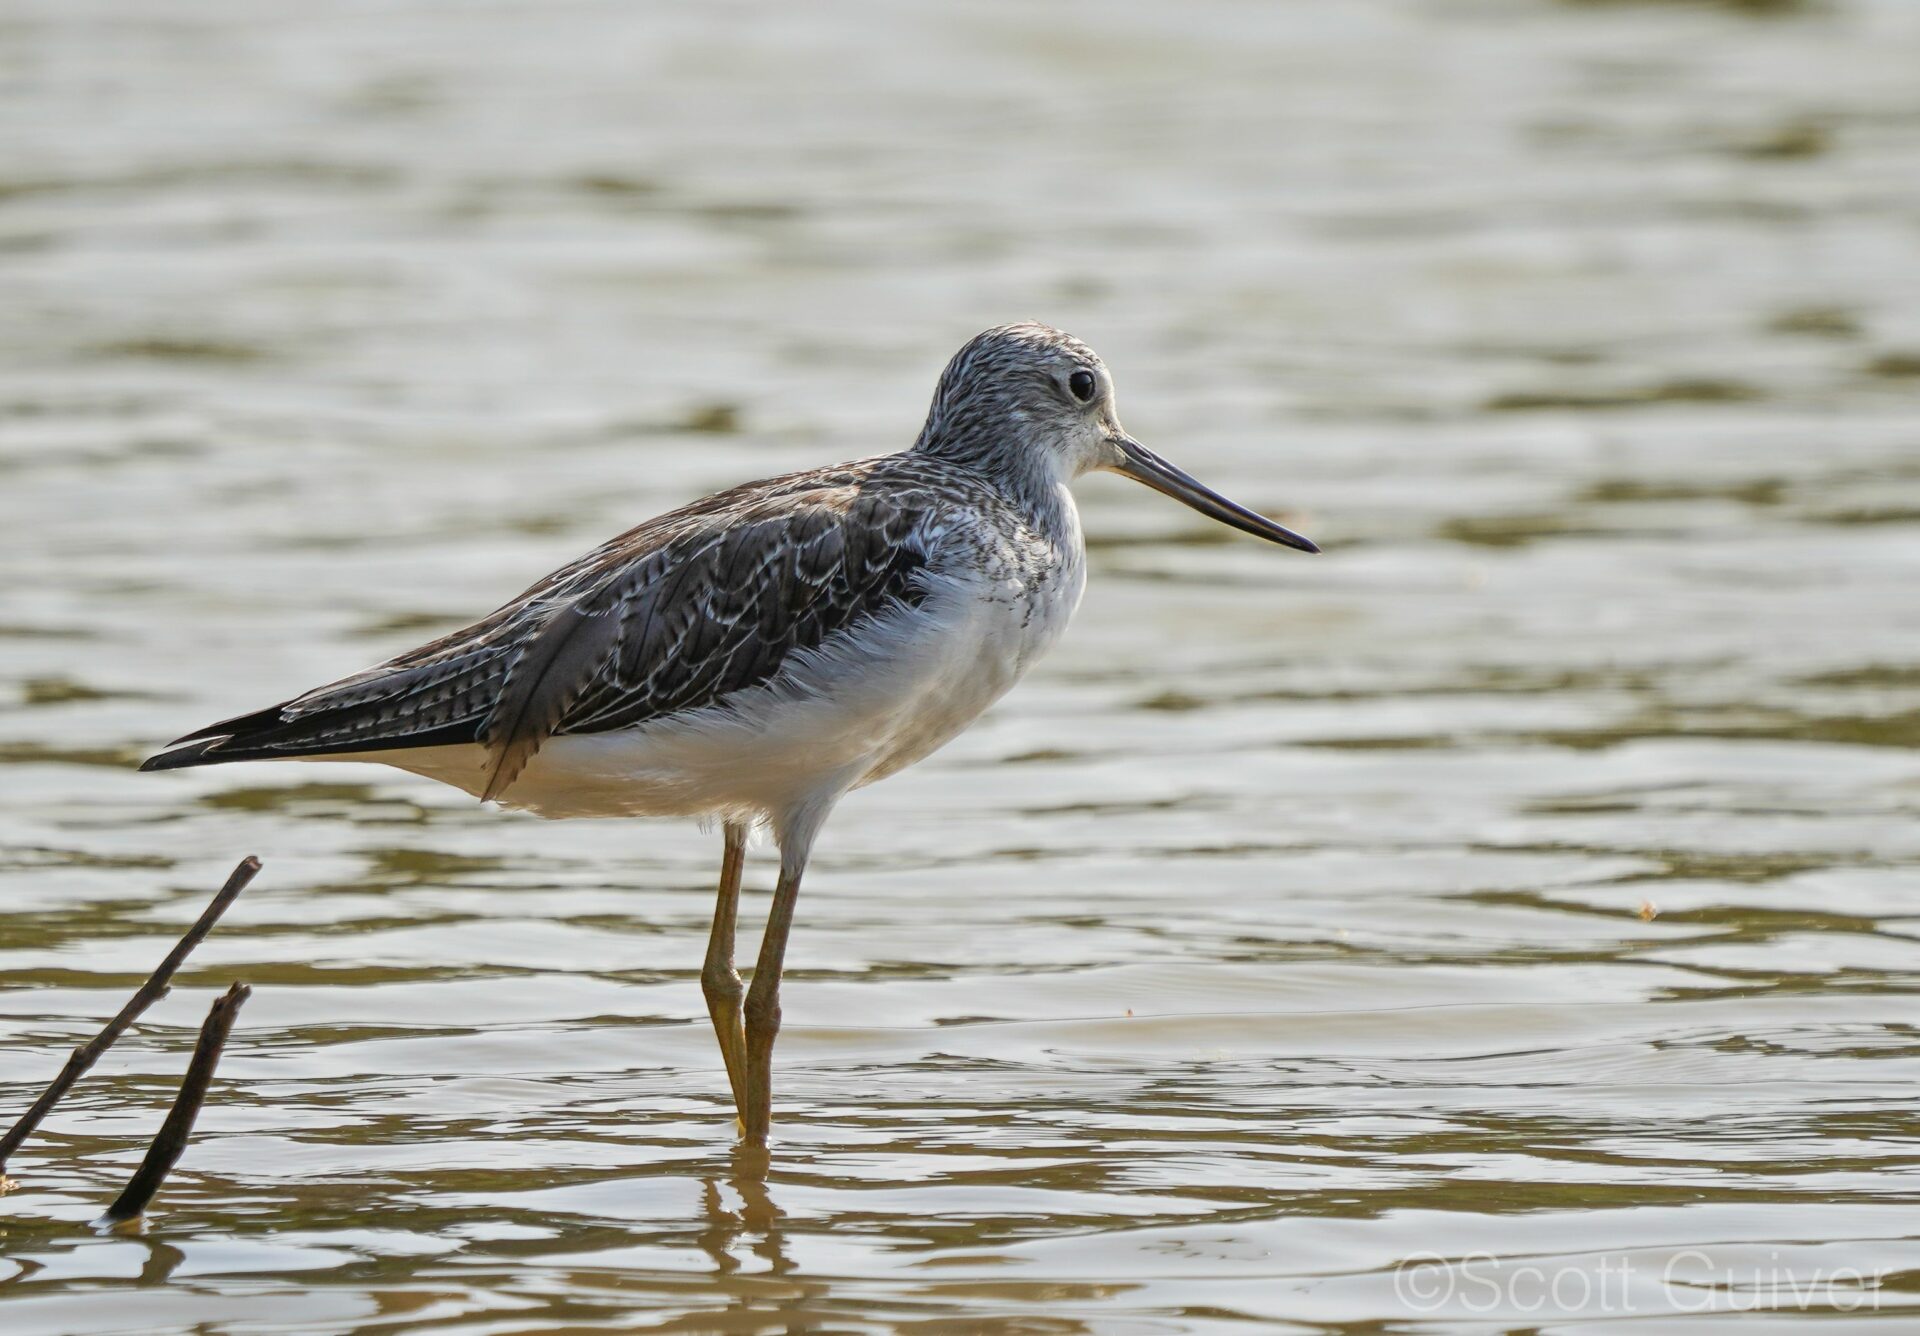 A Common Greenshank (Tringa nebularia) photographed in Western Africa while on passage migration. Credit: Scott Guiver 